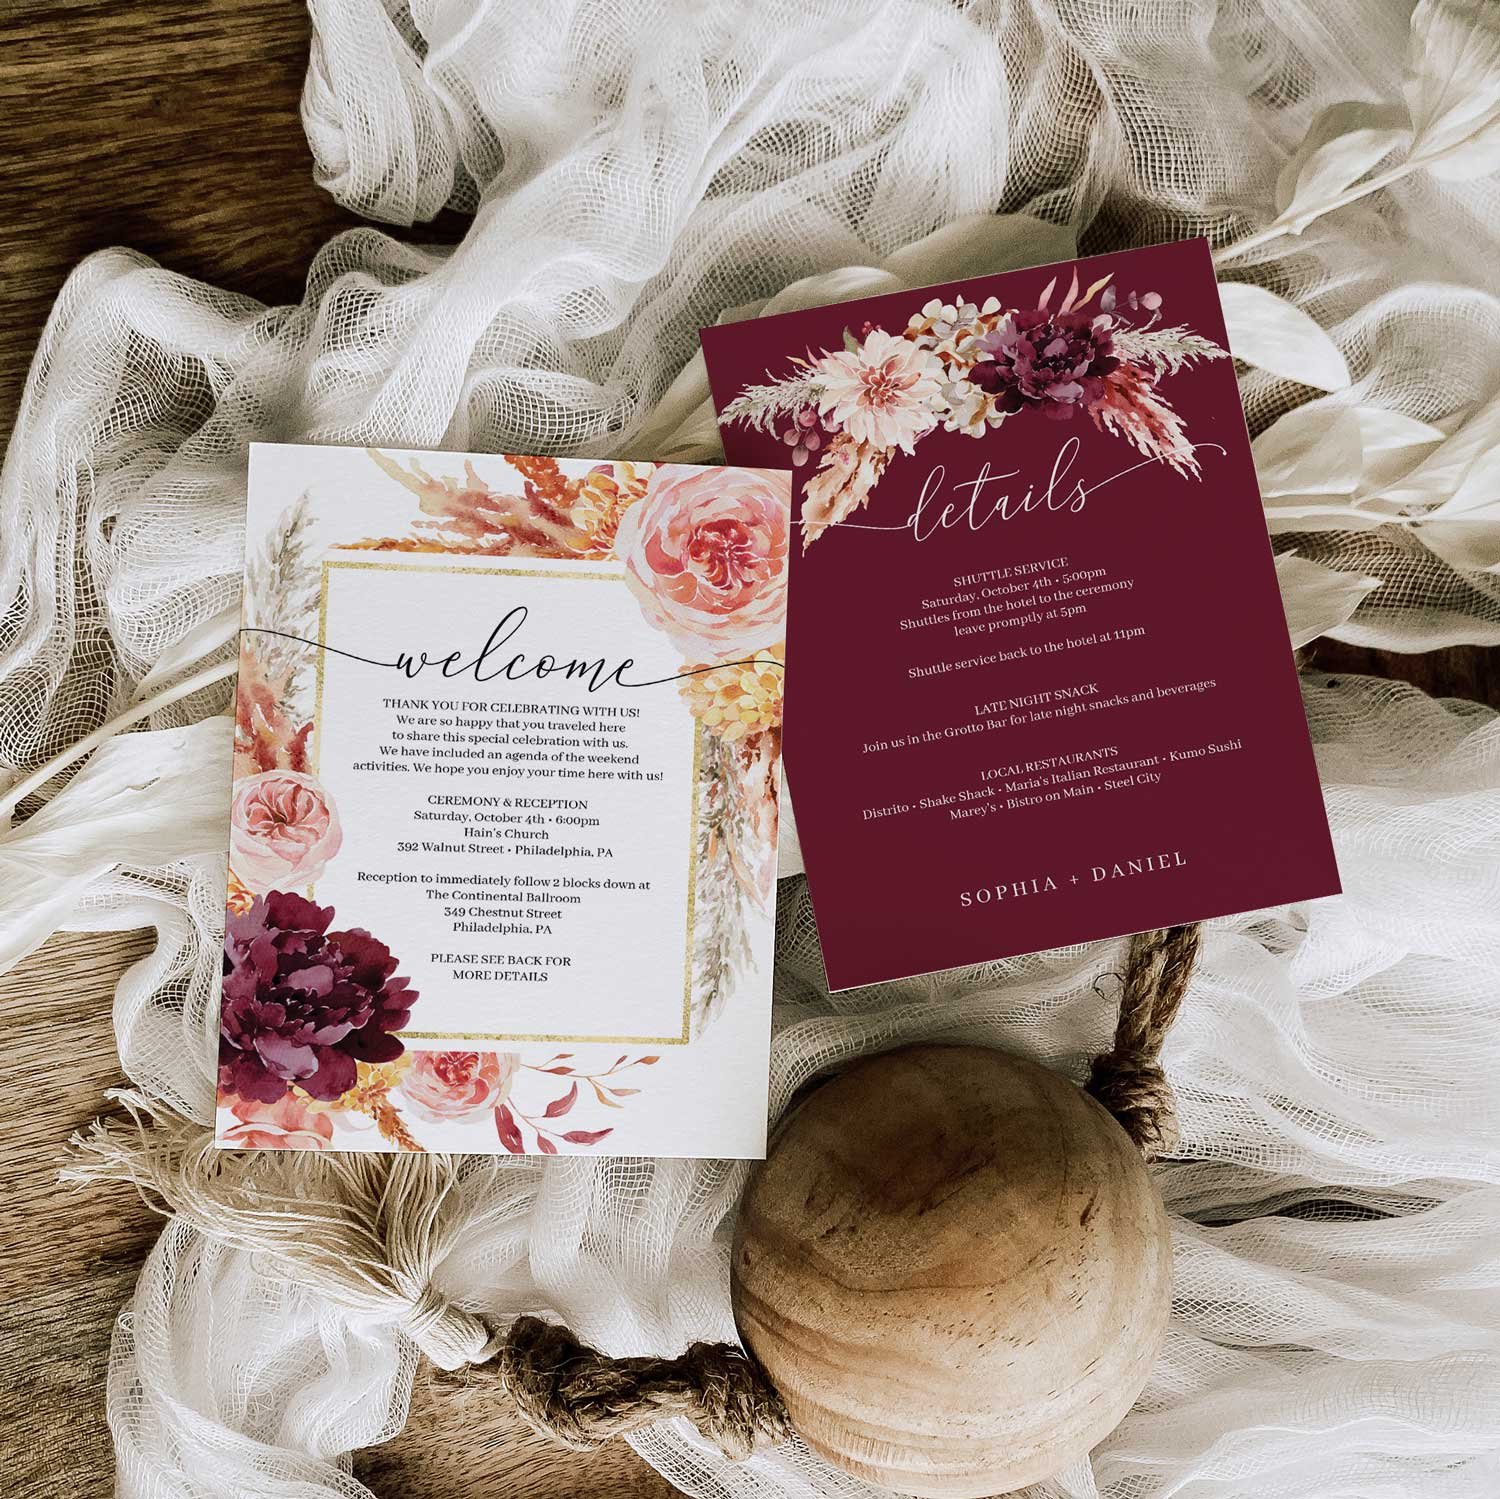 Wedding Welcome Letter and Details